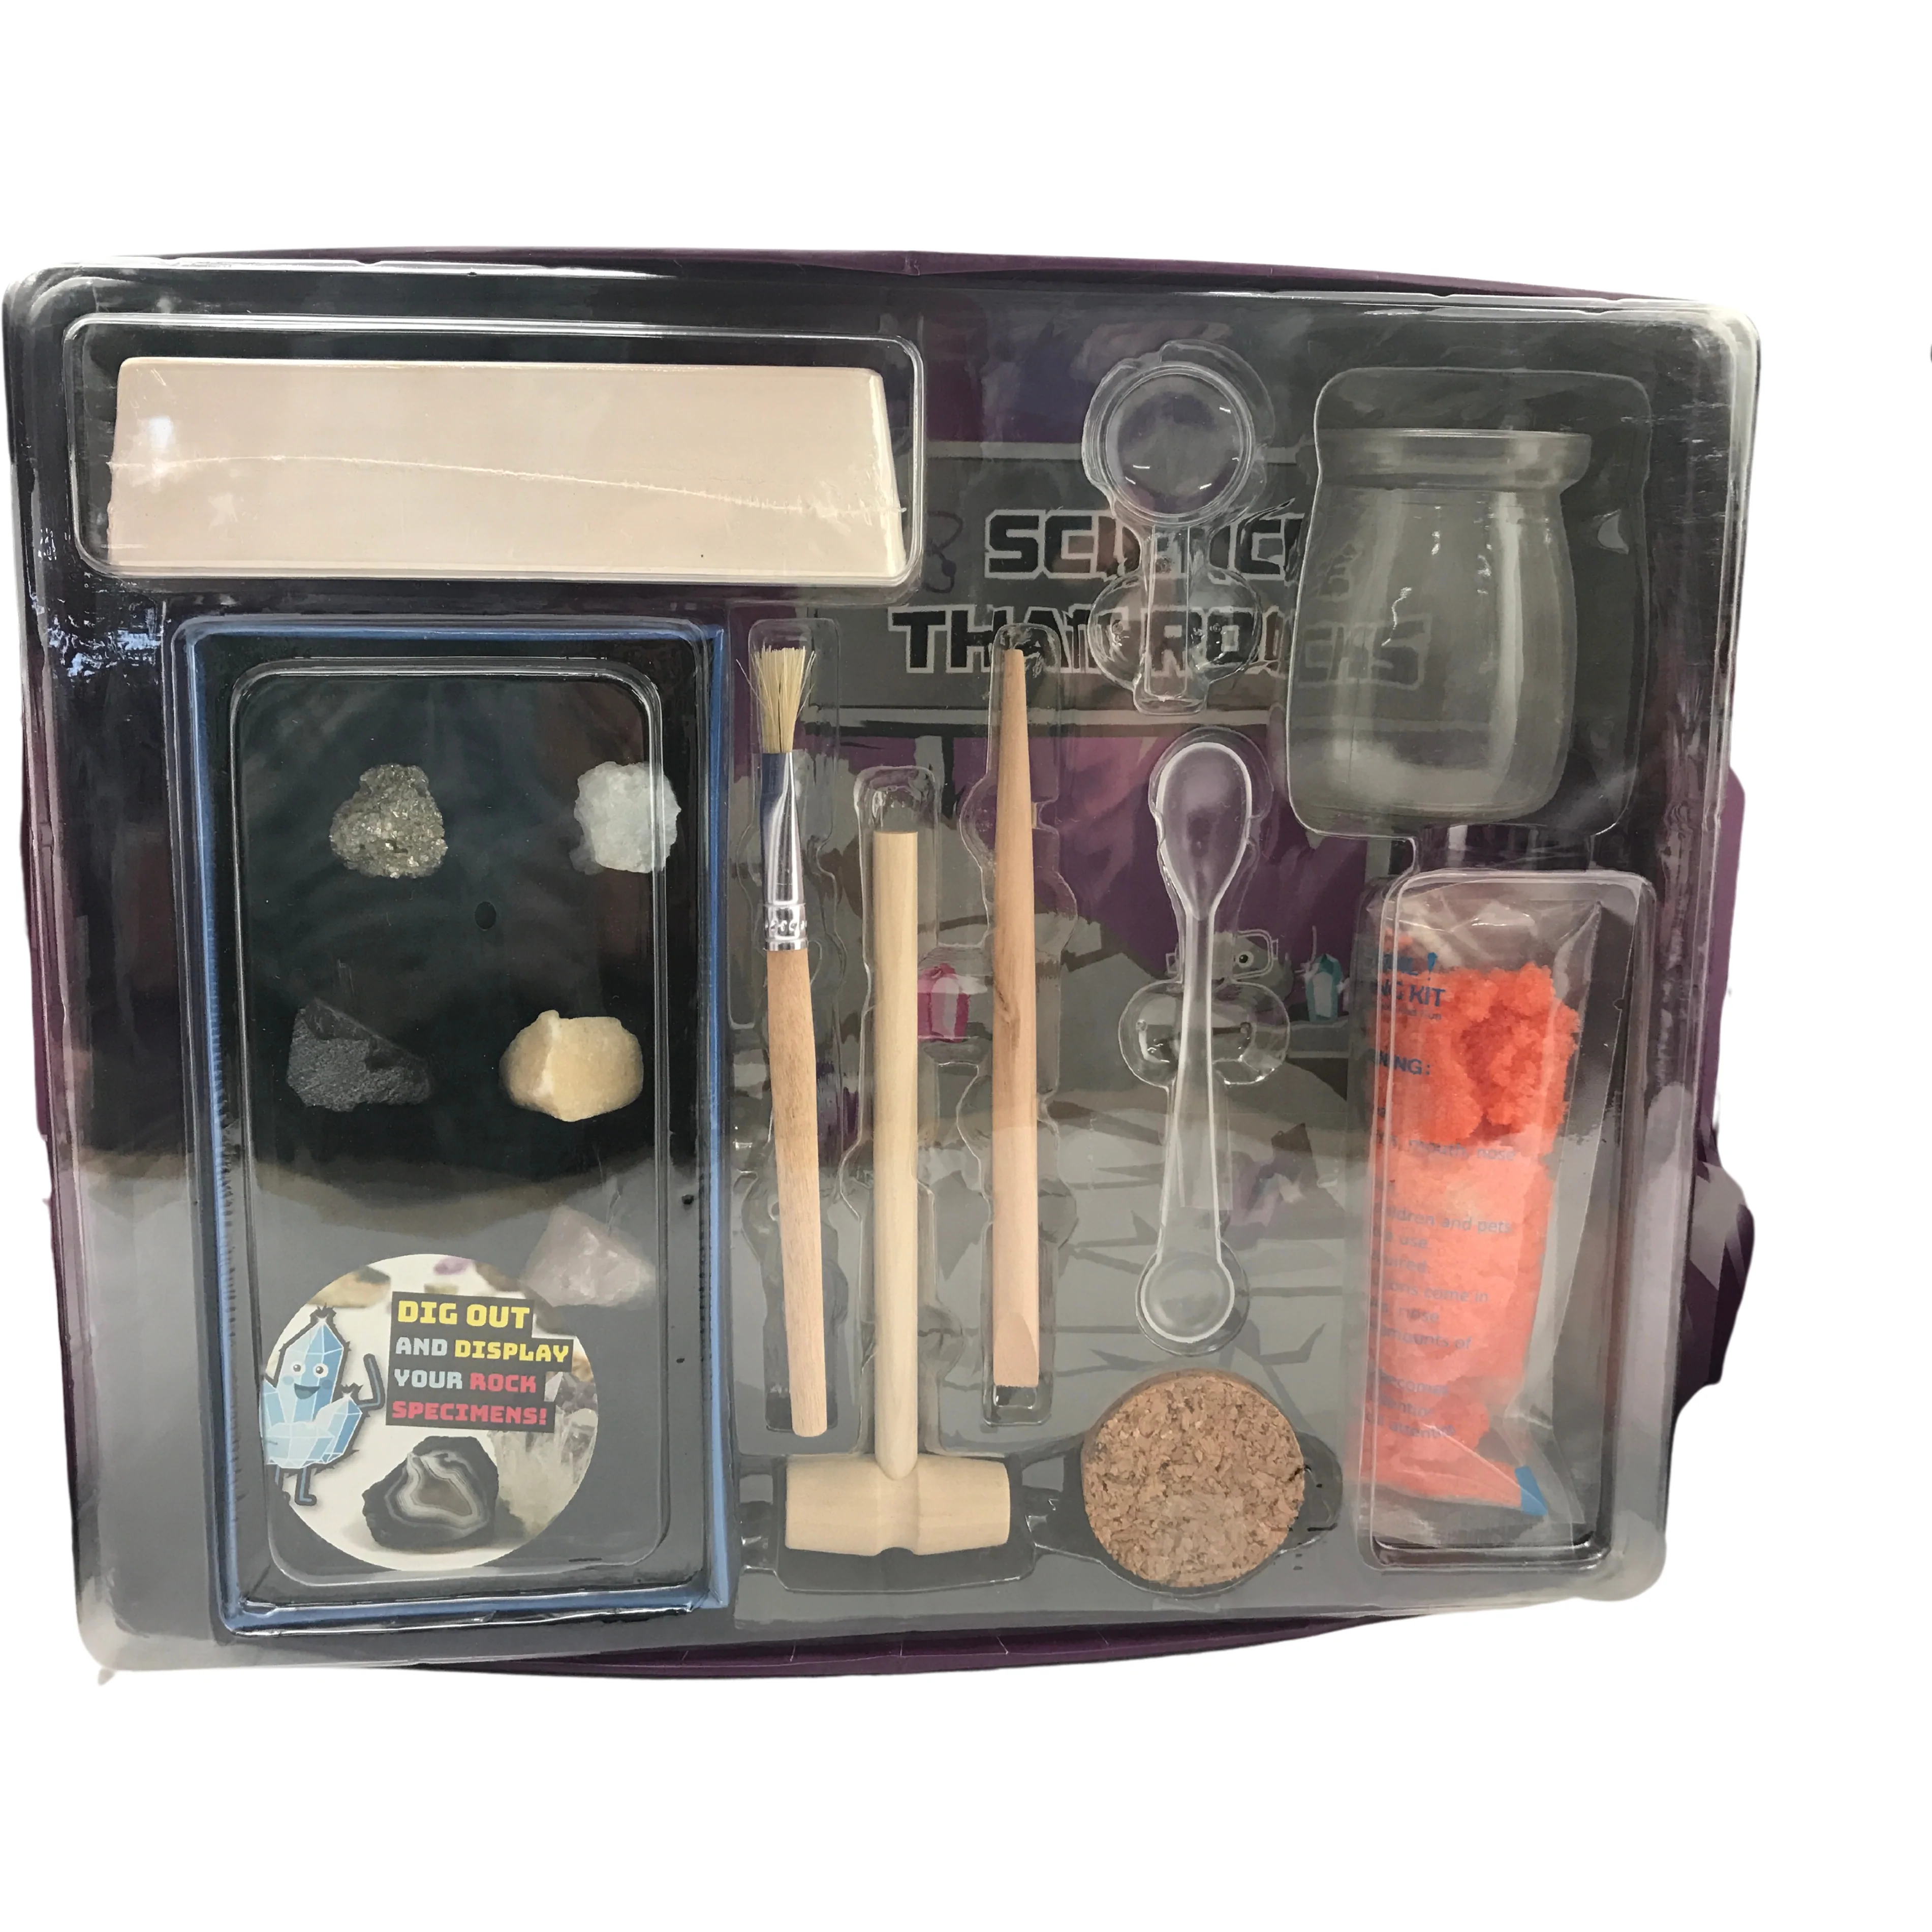 Spice Box Science Kit / Crystals & Rocks / STEM Learning Kit / Science Experiments **DEALS**